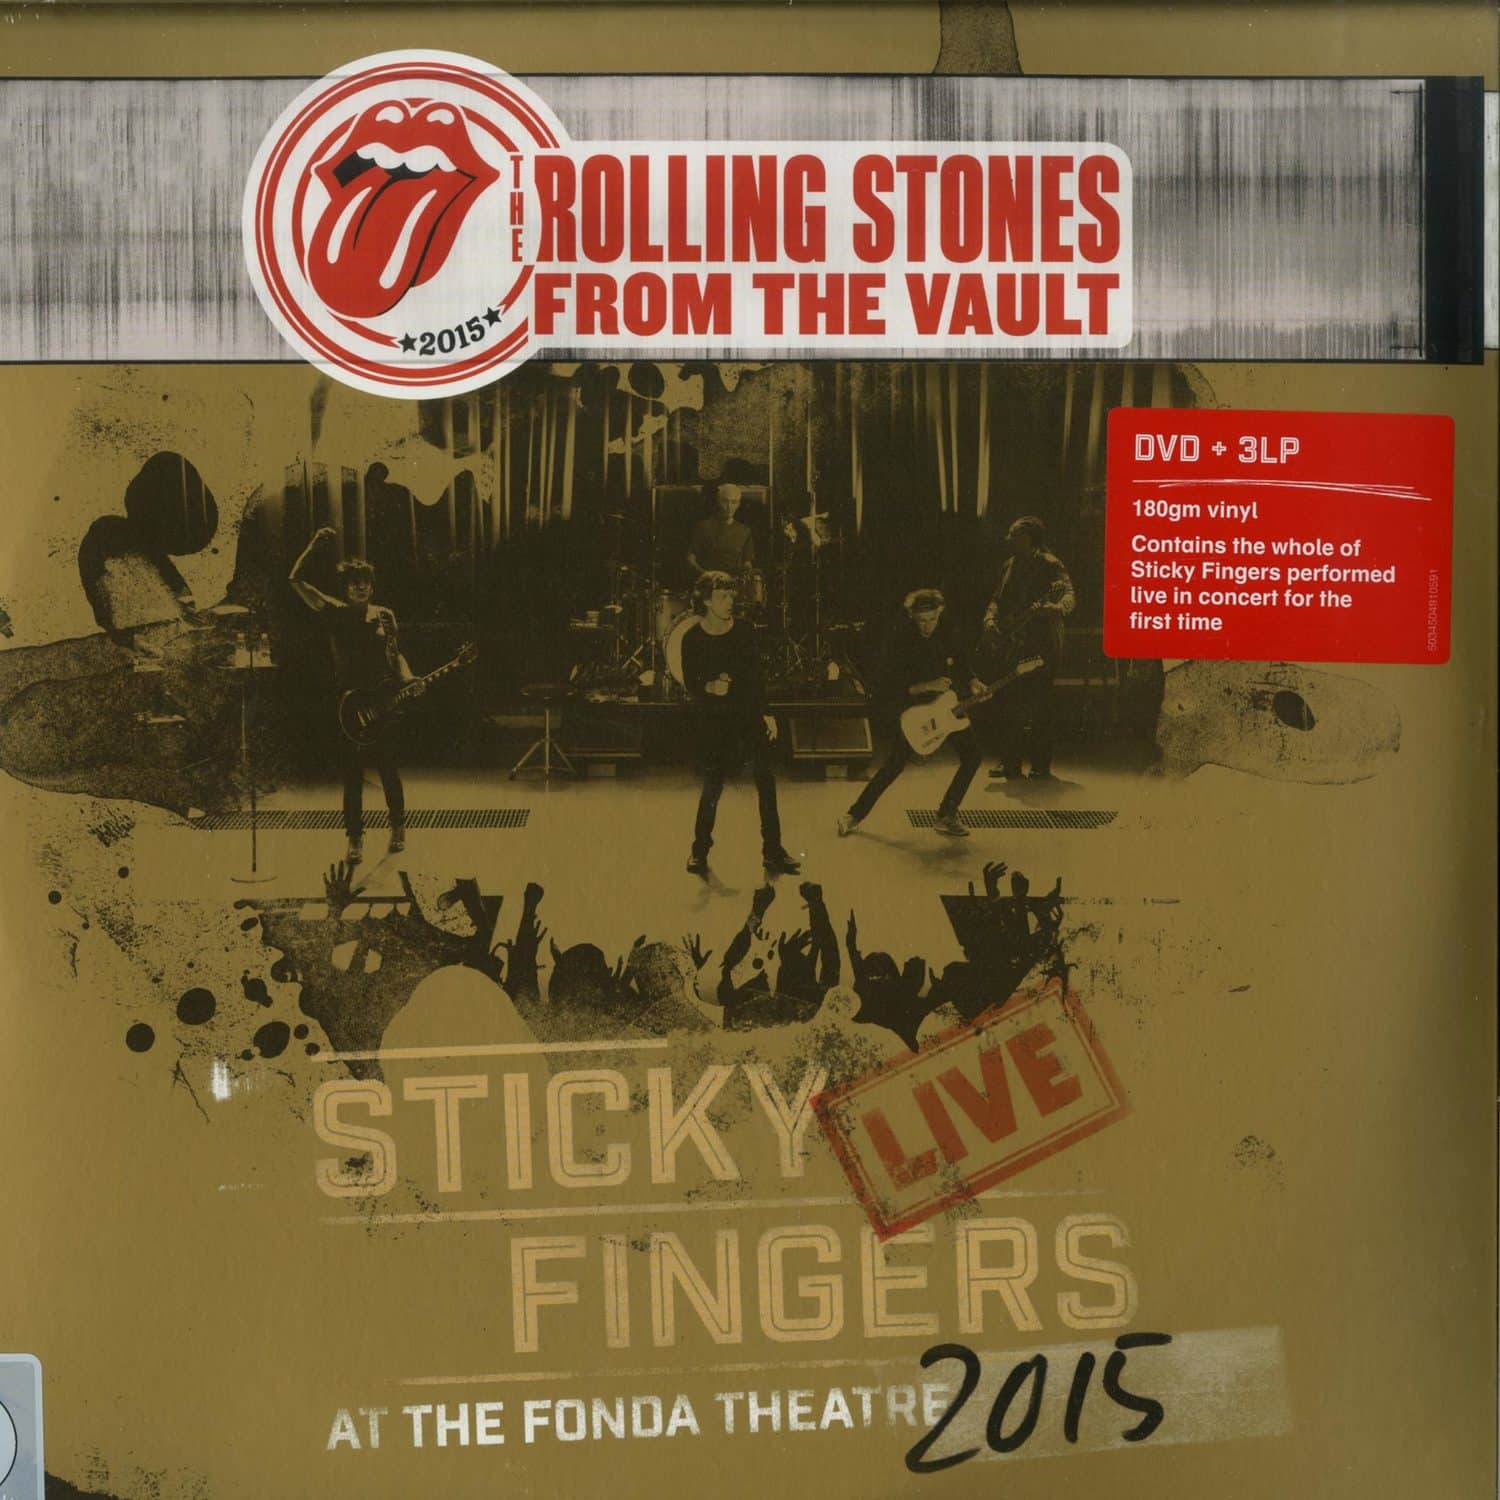 The Rolling Stones - FROM THE VAULT: STICKY FINGERS LIVE AT THE FONDA THEATRE 